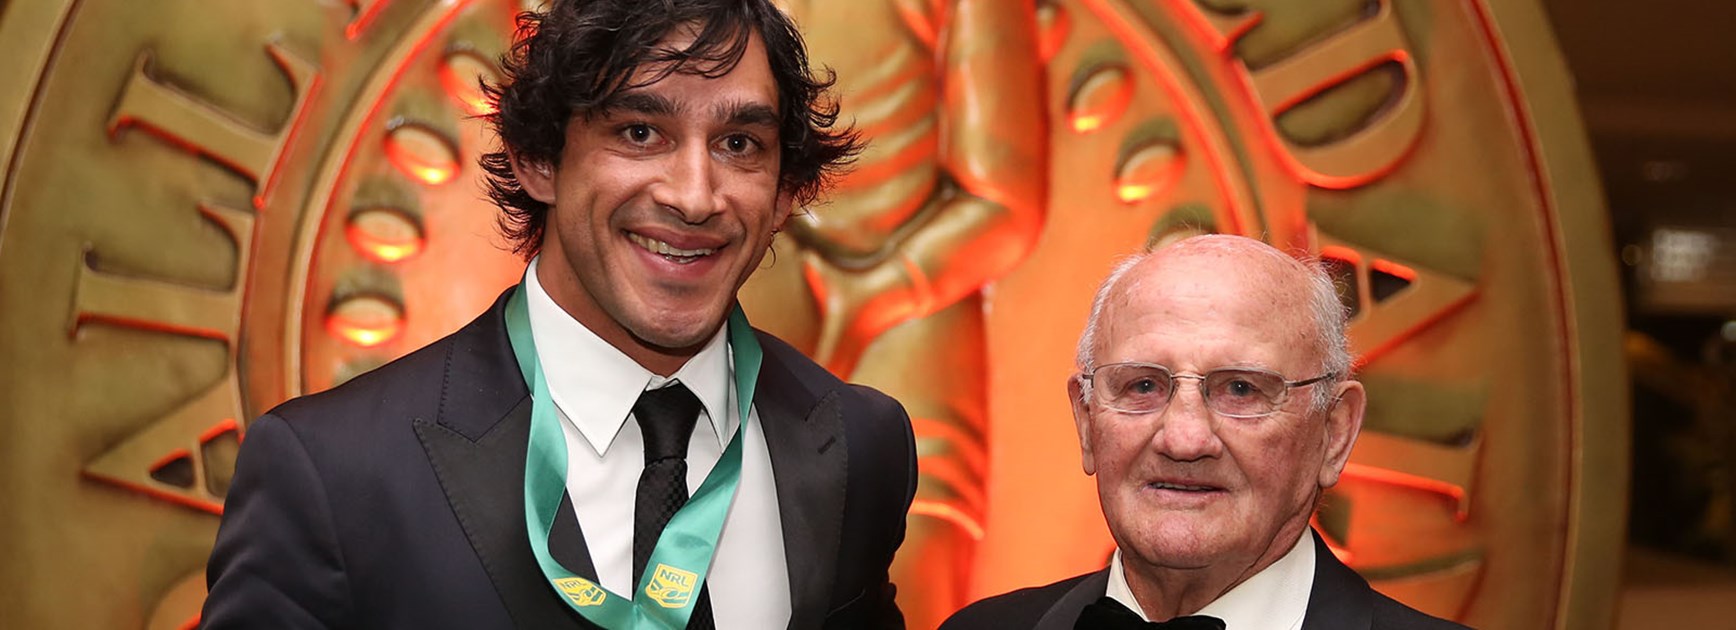 2014 Provan Summons Medal winner Johnathan Thurston with Arthur Summons at the Dally M Medal night.